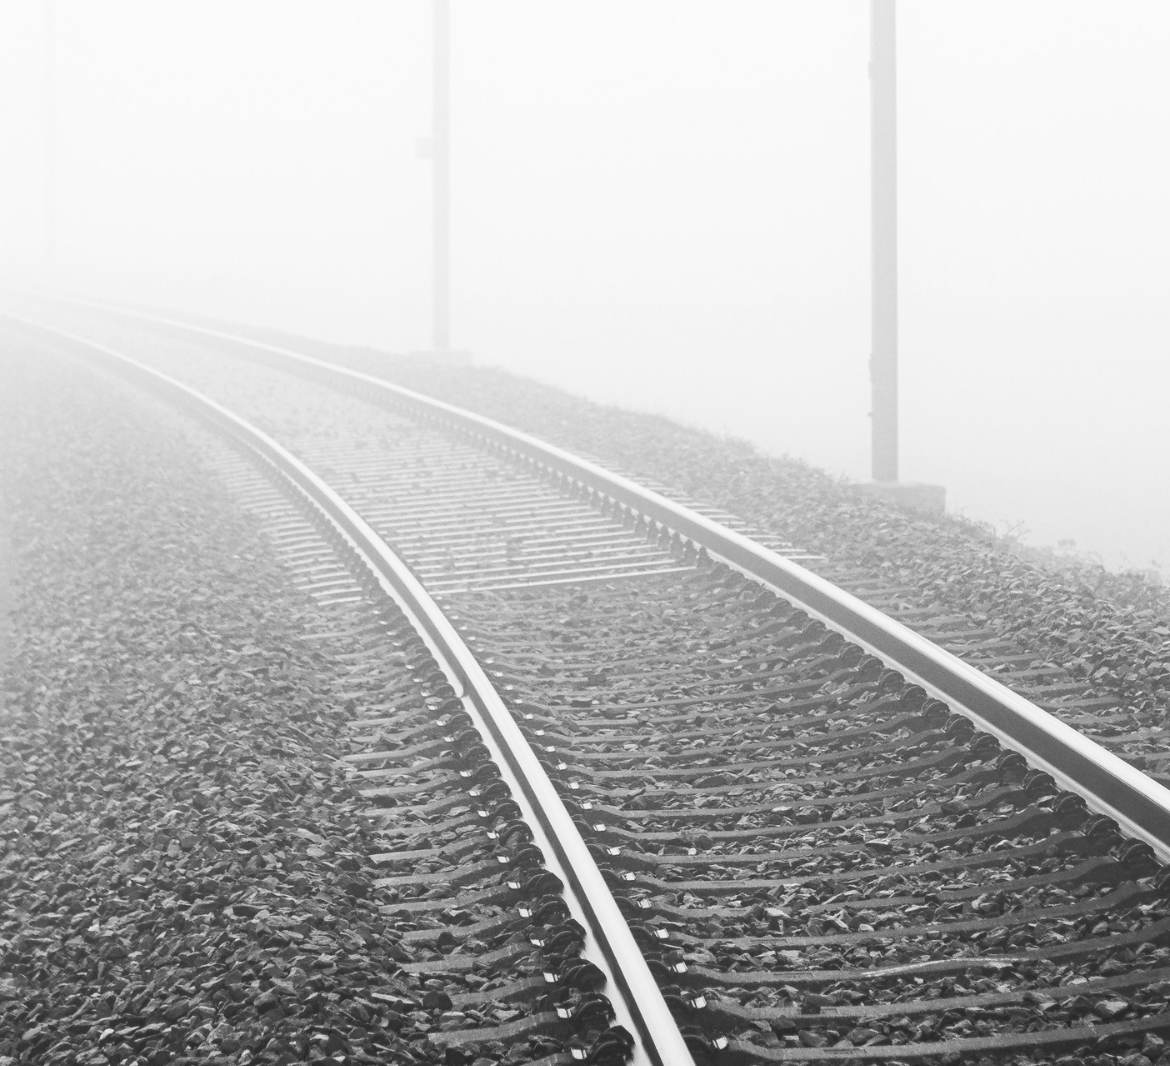 An empty black-and-white train track disappears into the fog